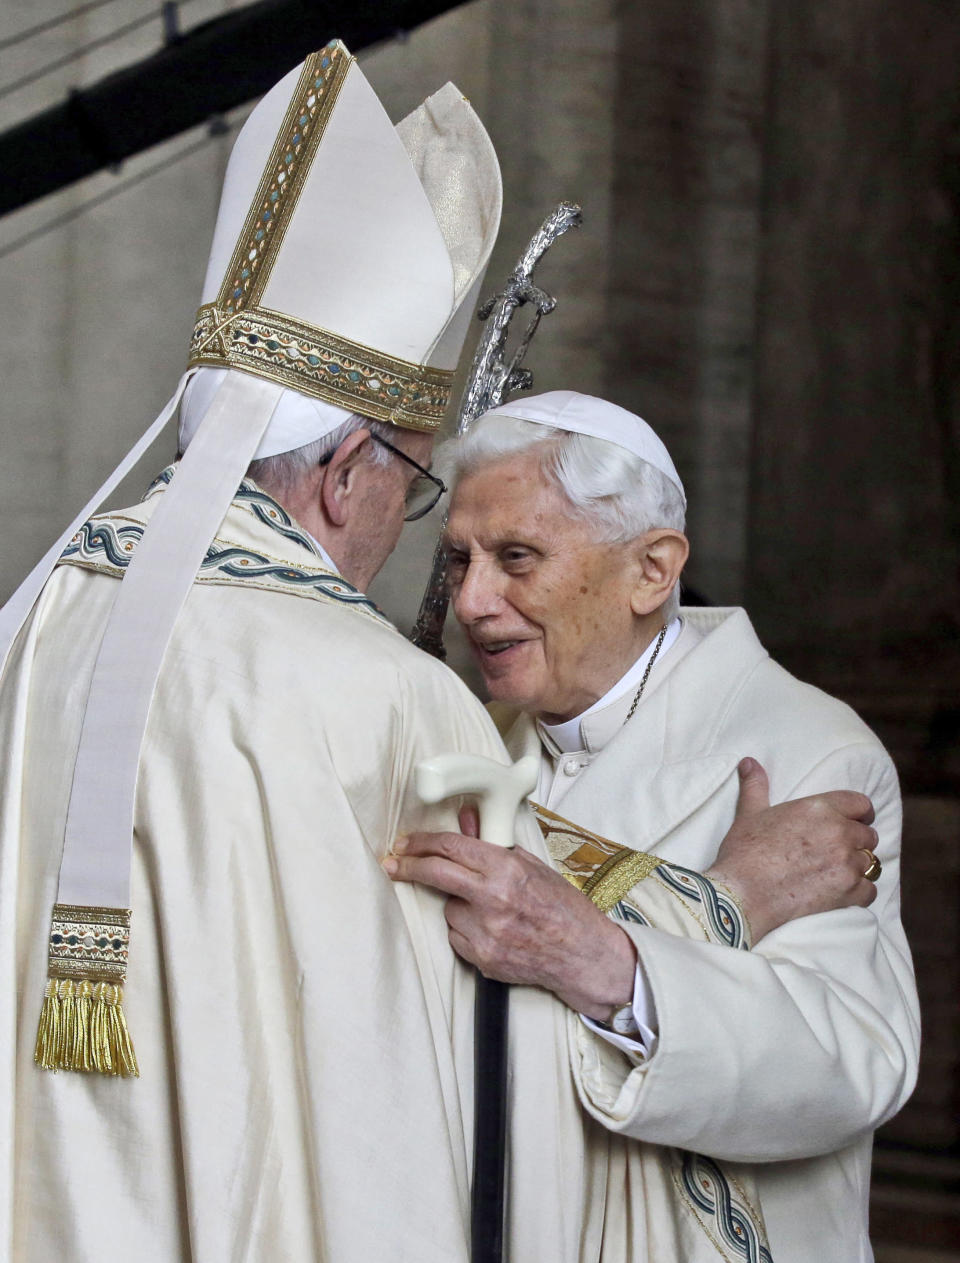 FILE - Emeritus Pope Benedict XVI, right, hugs Pope Francis inside St. Peter's Basilica during the ceremony marking the start of the Holy Year, at the Vatican, on Dec. 8, 2015. Emeritus Pope Benedict XVI turned 95 this past weekend, a significant milestone on its own but even more given he has now been a retired pope longer than he was a reigning one. To mark the occasion, a new book published Thursday, April 21, 2022 sets out to examine the current state of Vatican affairs not so much through the lens of Pope Francis’ nine-year papacy, but via Benedict’s nine-year retirement. (AP Photo/Gregorio Borgia, File)